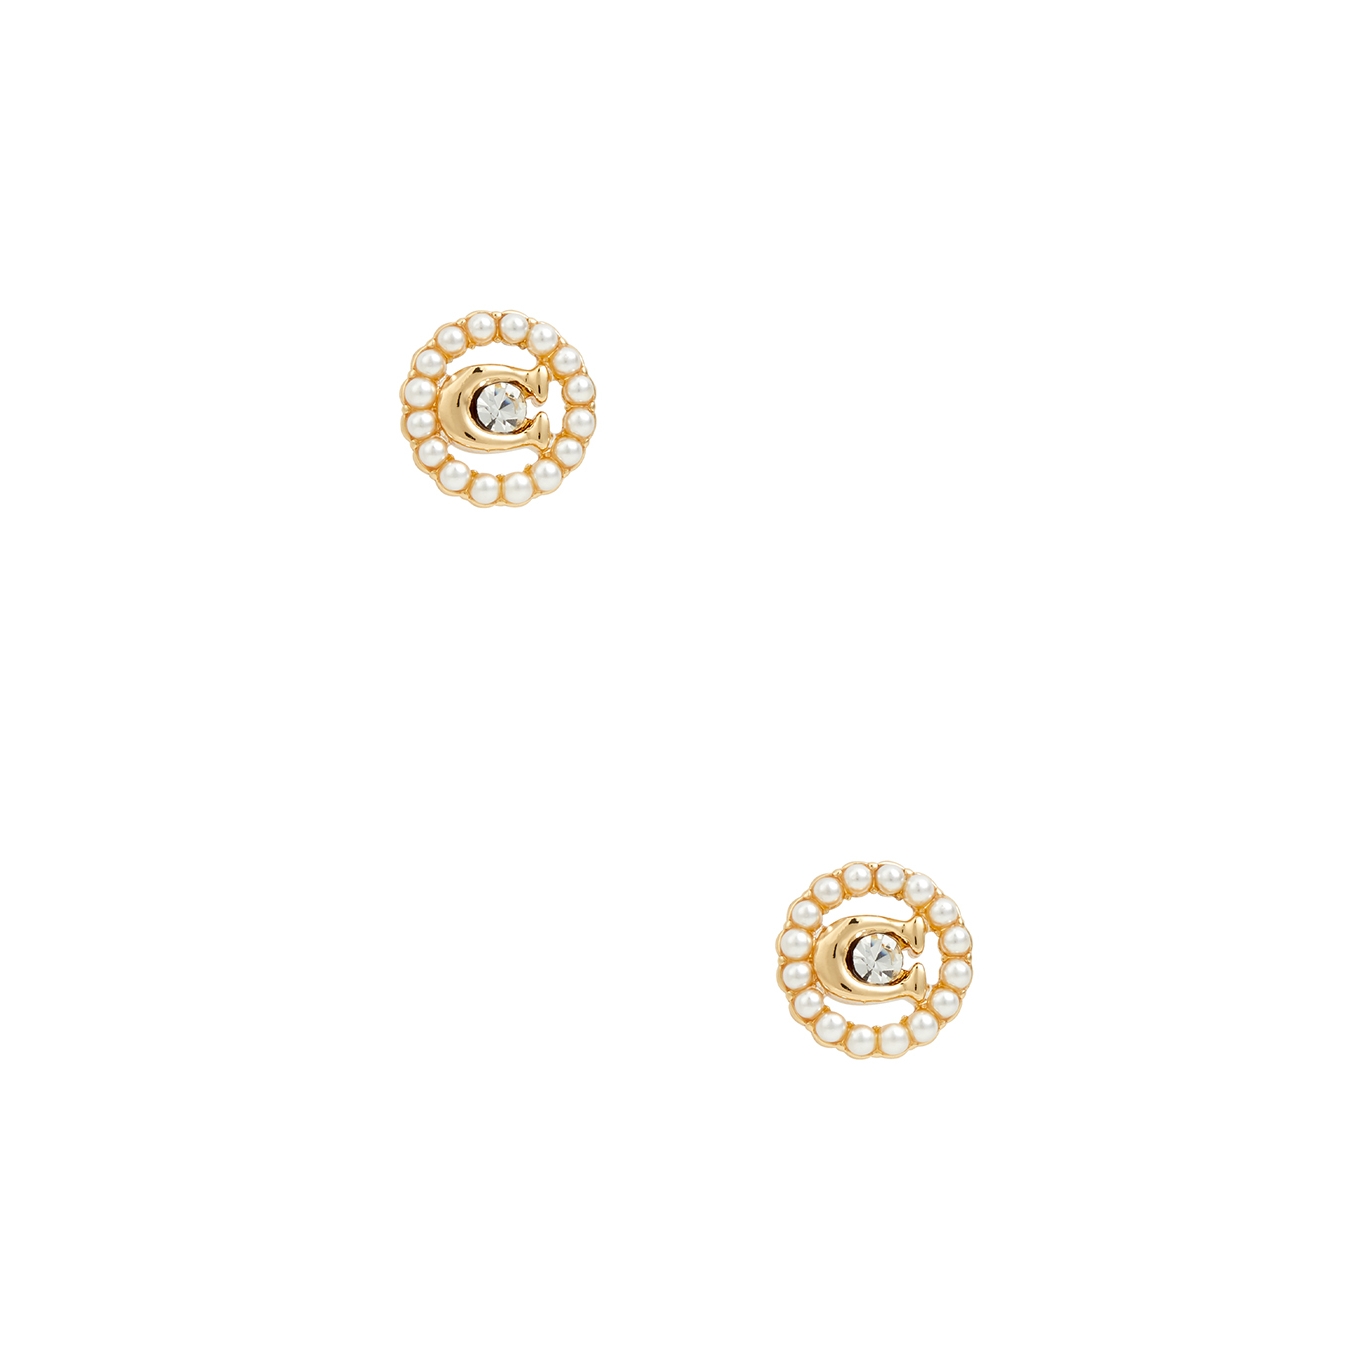 Coach Embellished Stud Earrings - Gold - One Size